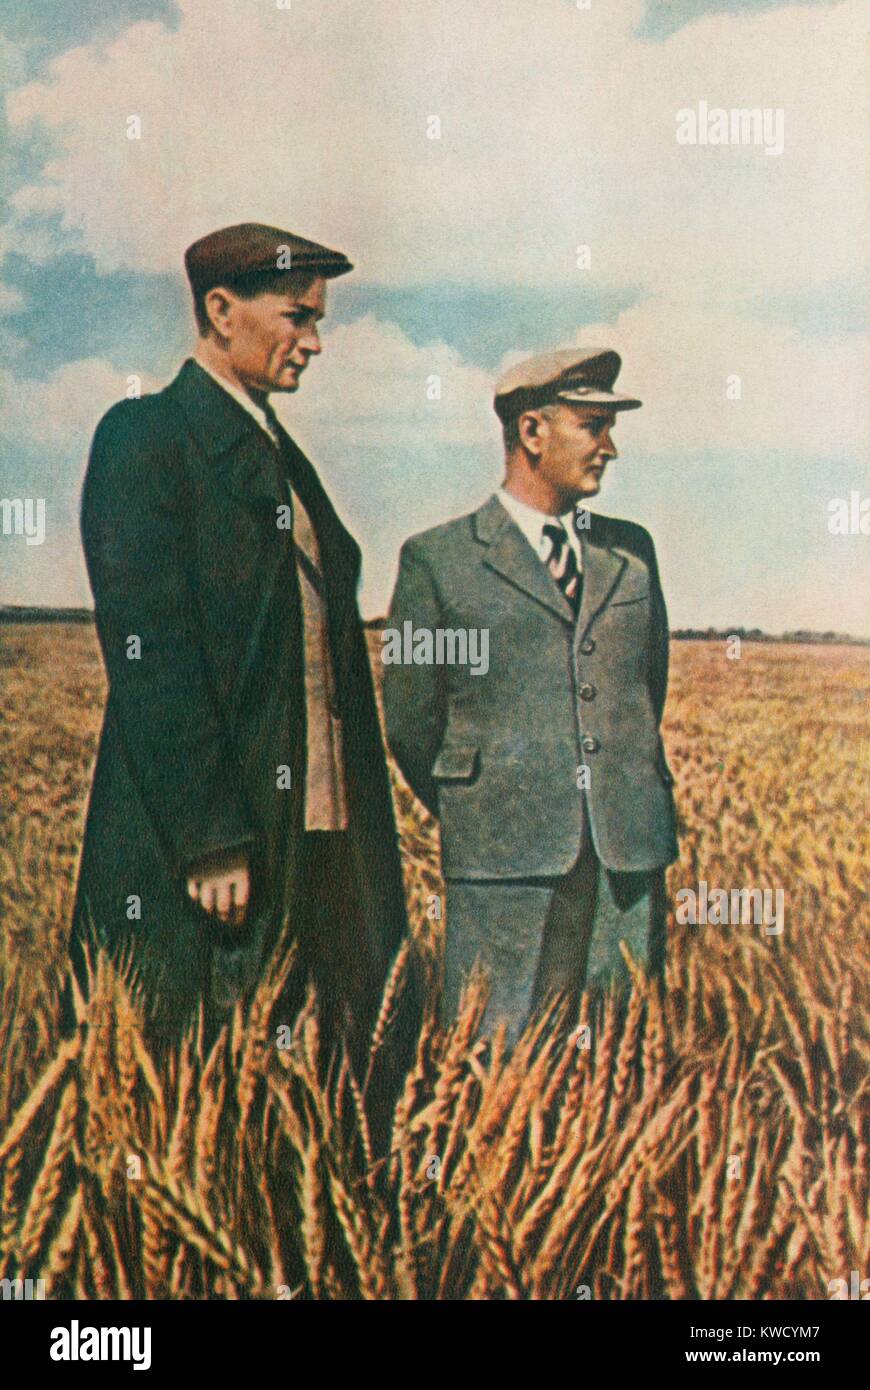 Trofim Lysenko (left), at an experimental farm Academy of Agriculture Science, 1949. As President of the Soviet Russian Academy of Agriculture Science he denied existence of genes or DNA, and promoted his pseudoscientific theory inheritance of acquired characteristics (BSLOC 2017 2 35) Stock Photo